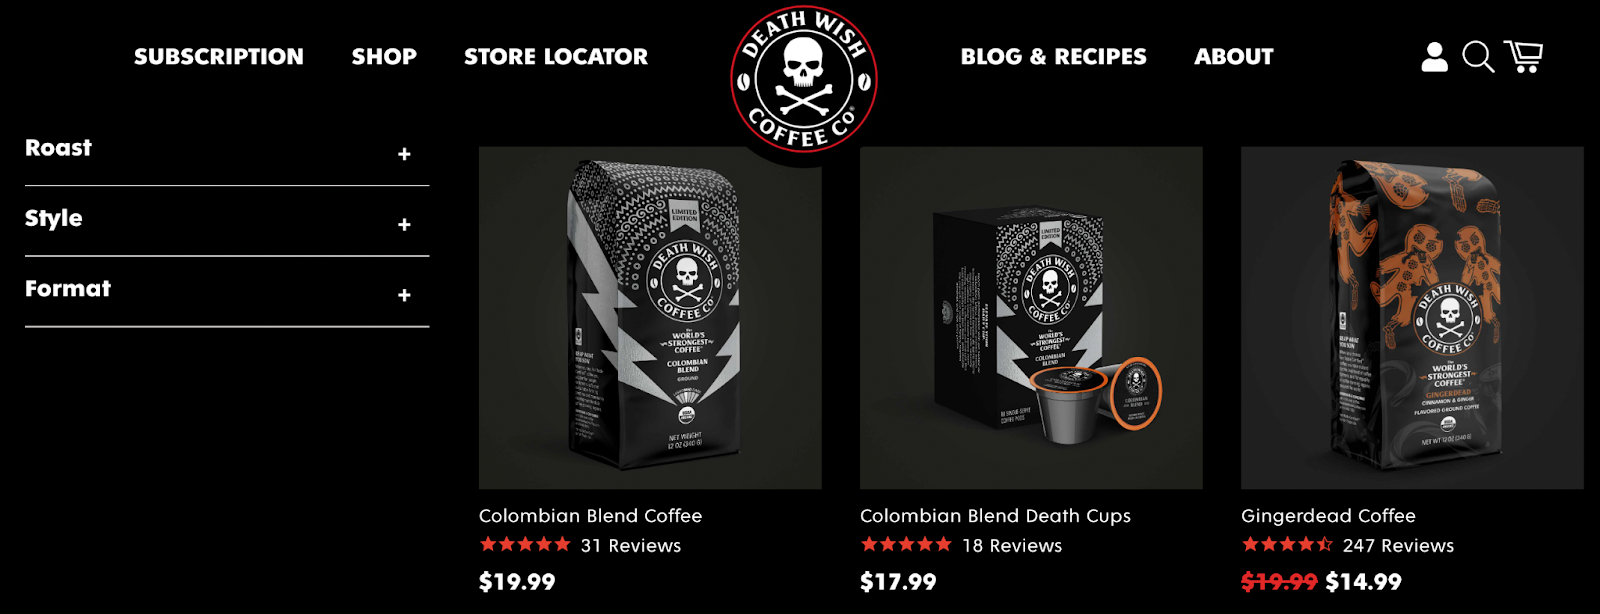 gift ideas for sales reps, death wish coffee